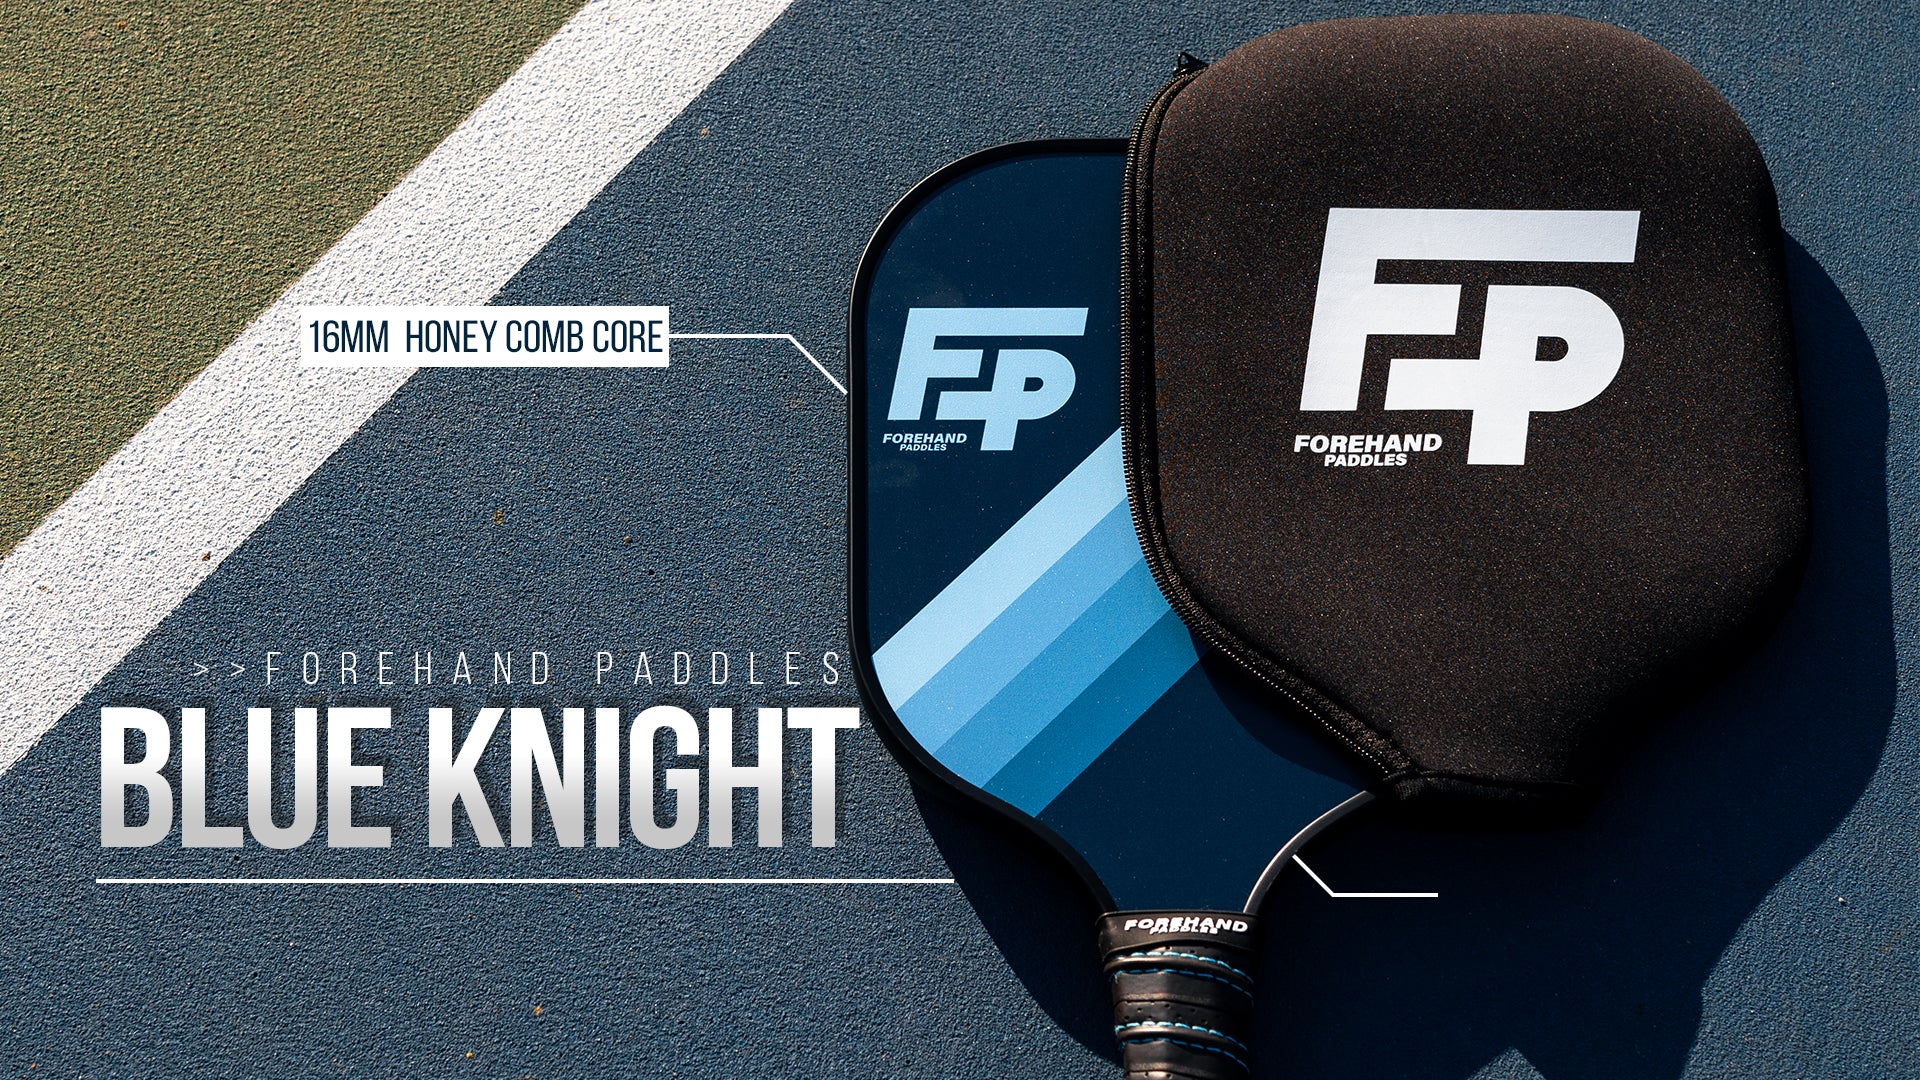 Forehand Paddles Blue Knight Pickleball Paddle 16MM 